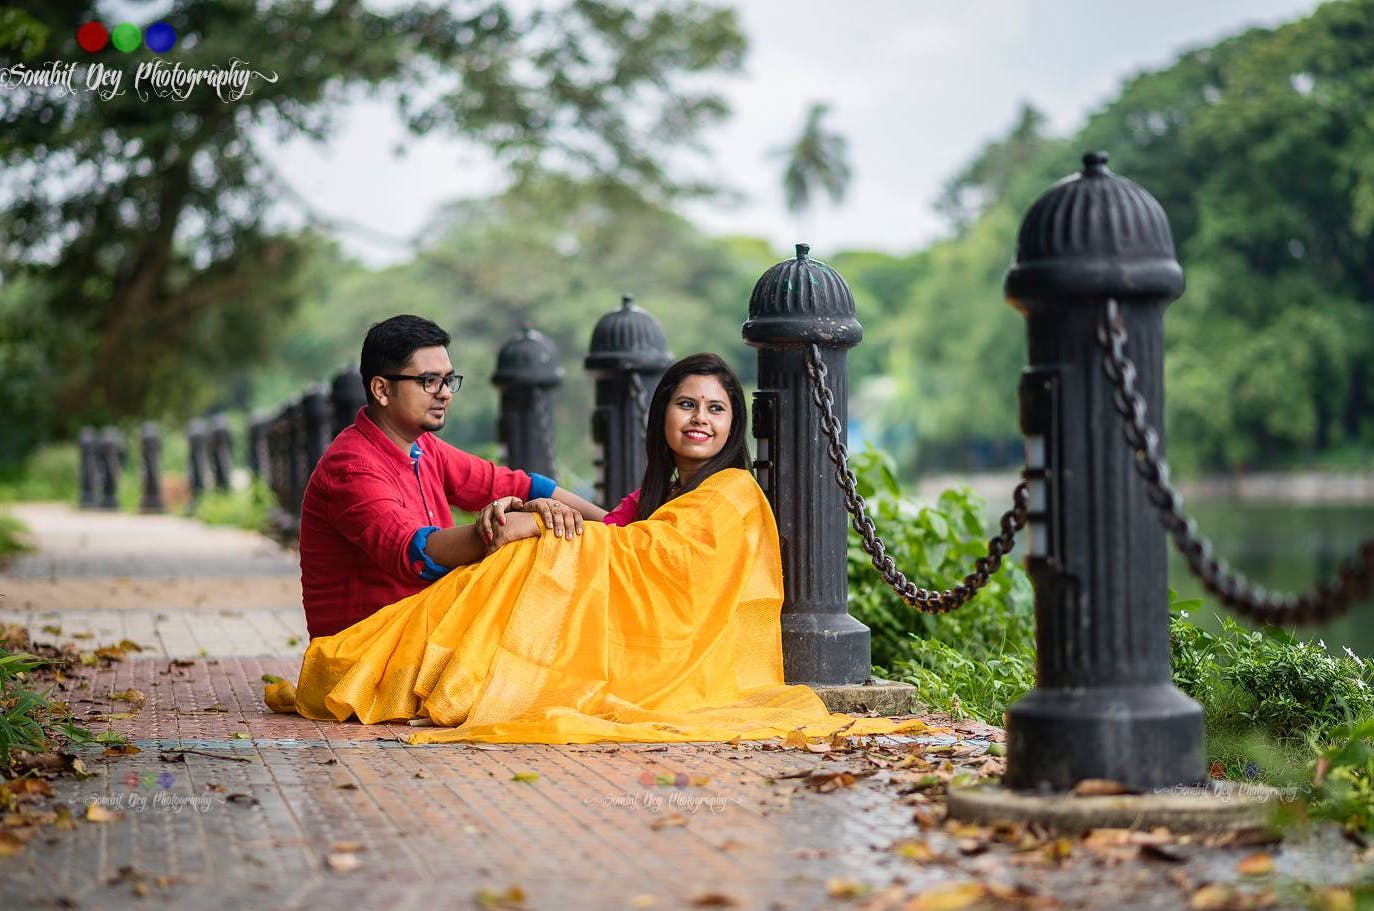 Top place in Kolkata for pre-wedding shoot
